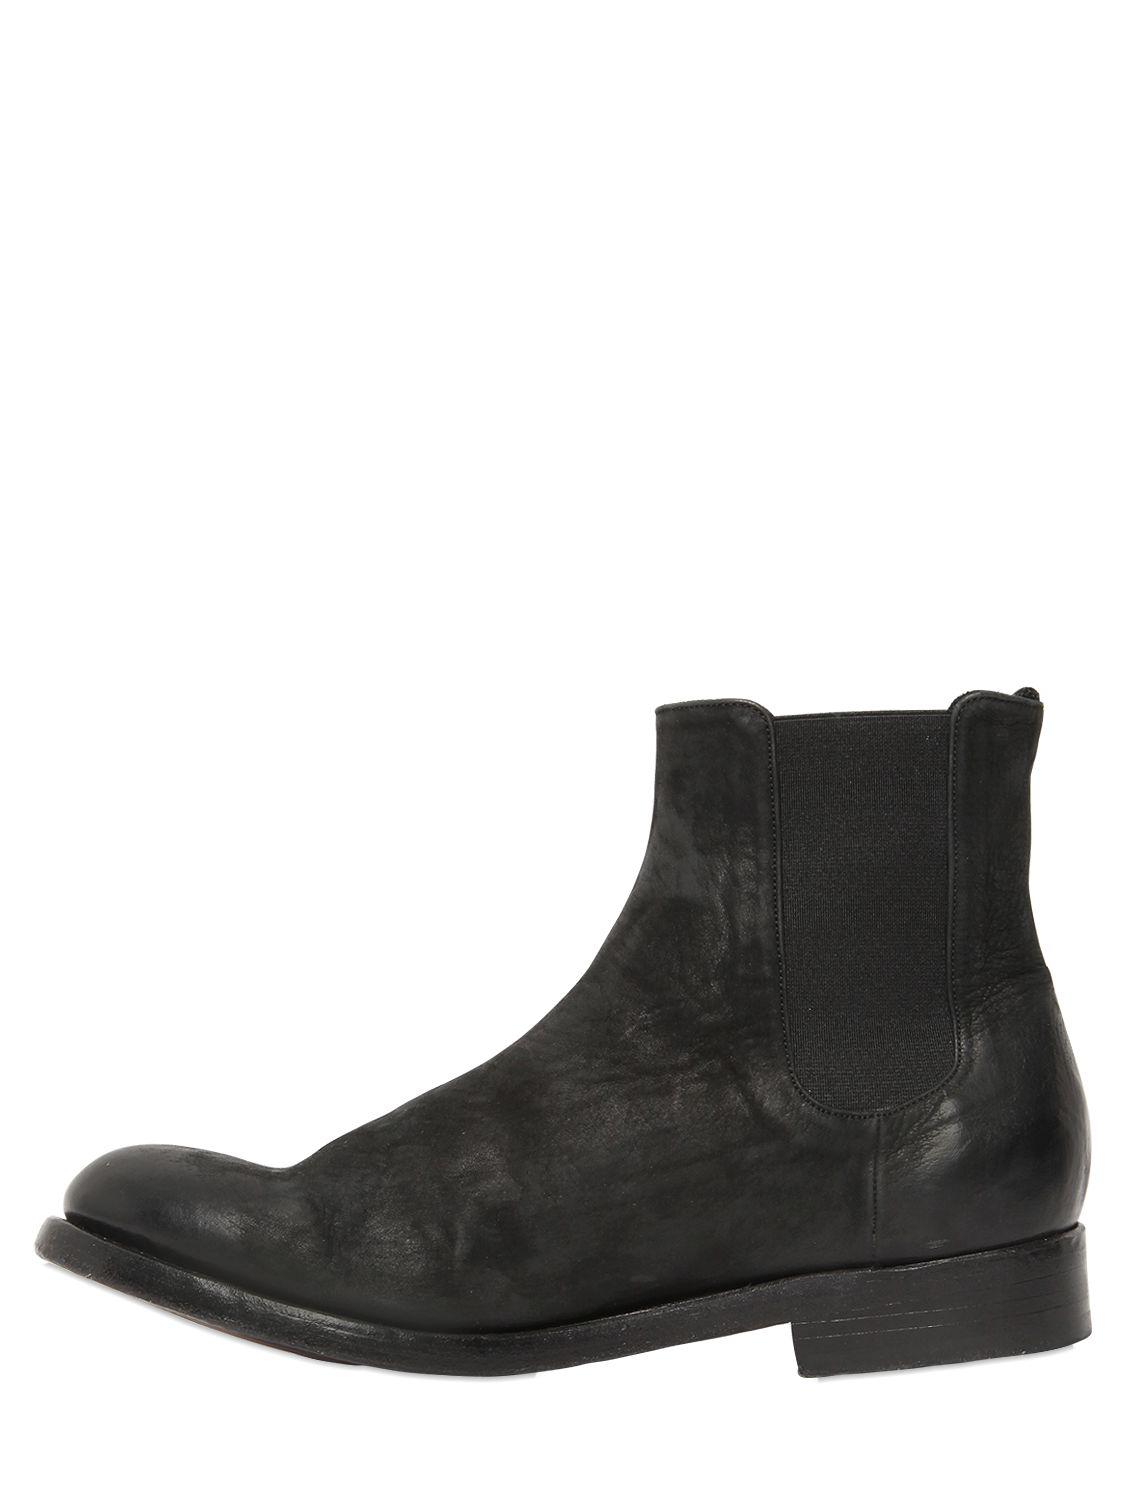 The Last Conspiracy Matte Leather Chelsea Boots in Black for Men - Lyst